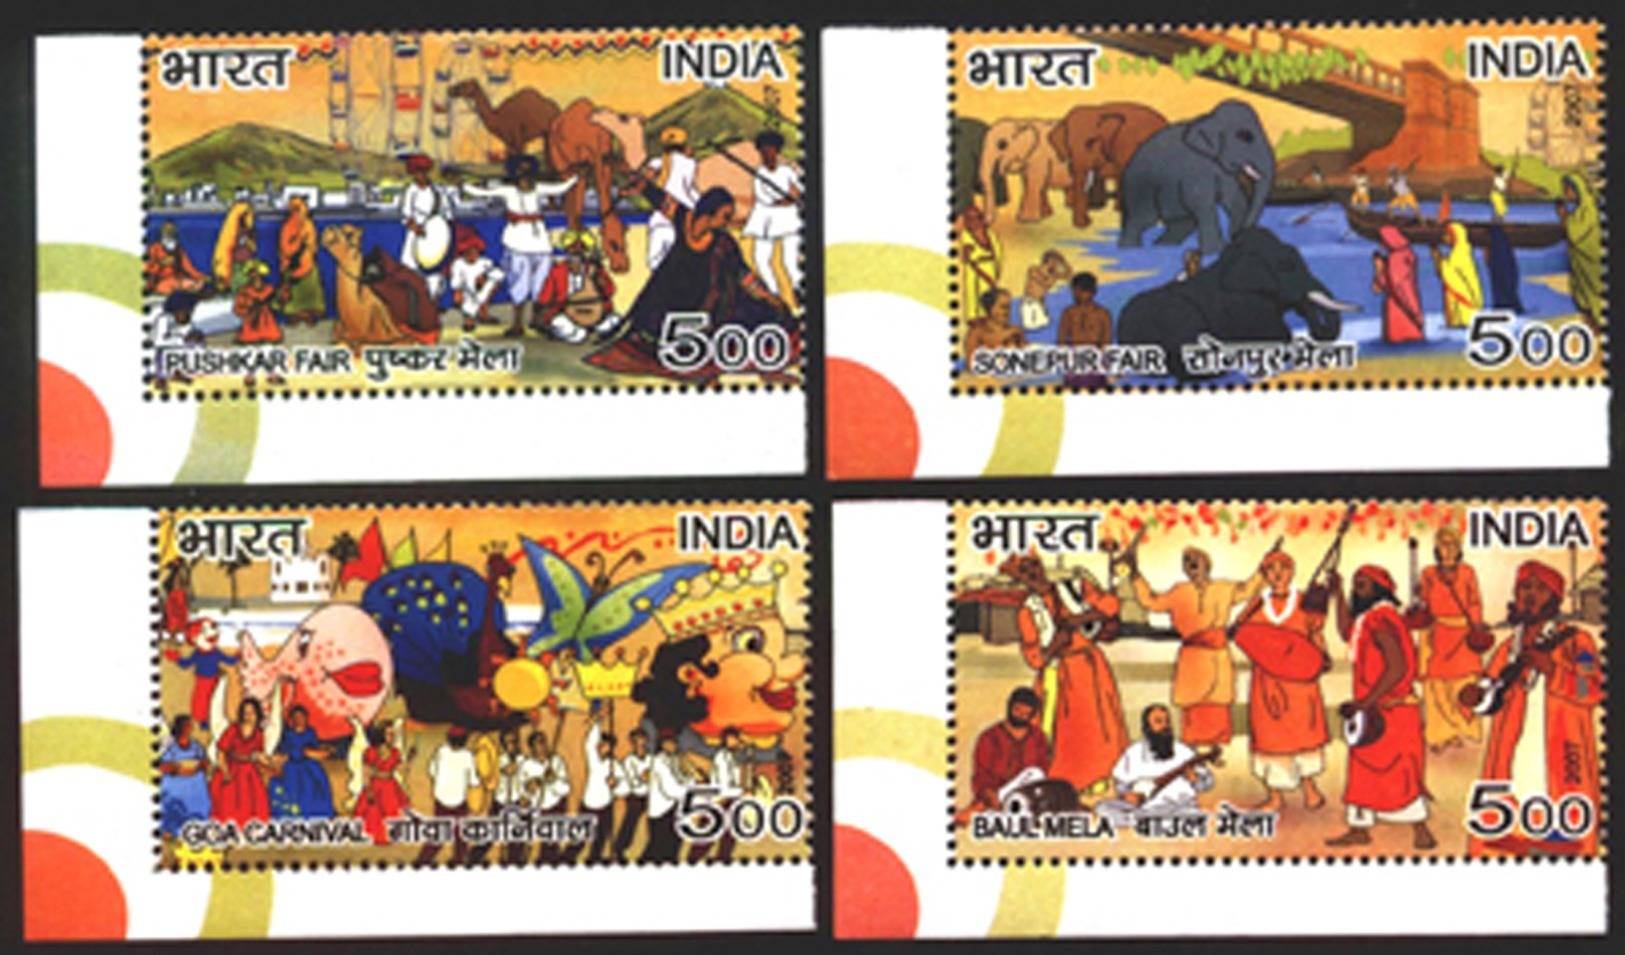 INDIA STAMPS, SET @F 4, 27 FEB 2007, FAIRS, MNH - Unused Stamps